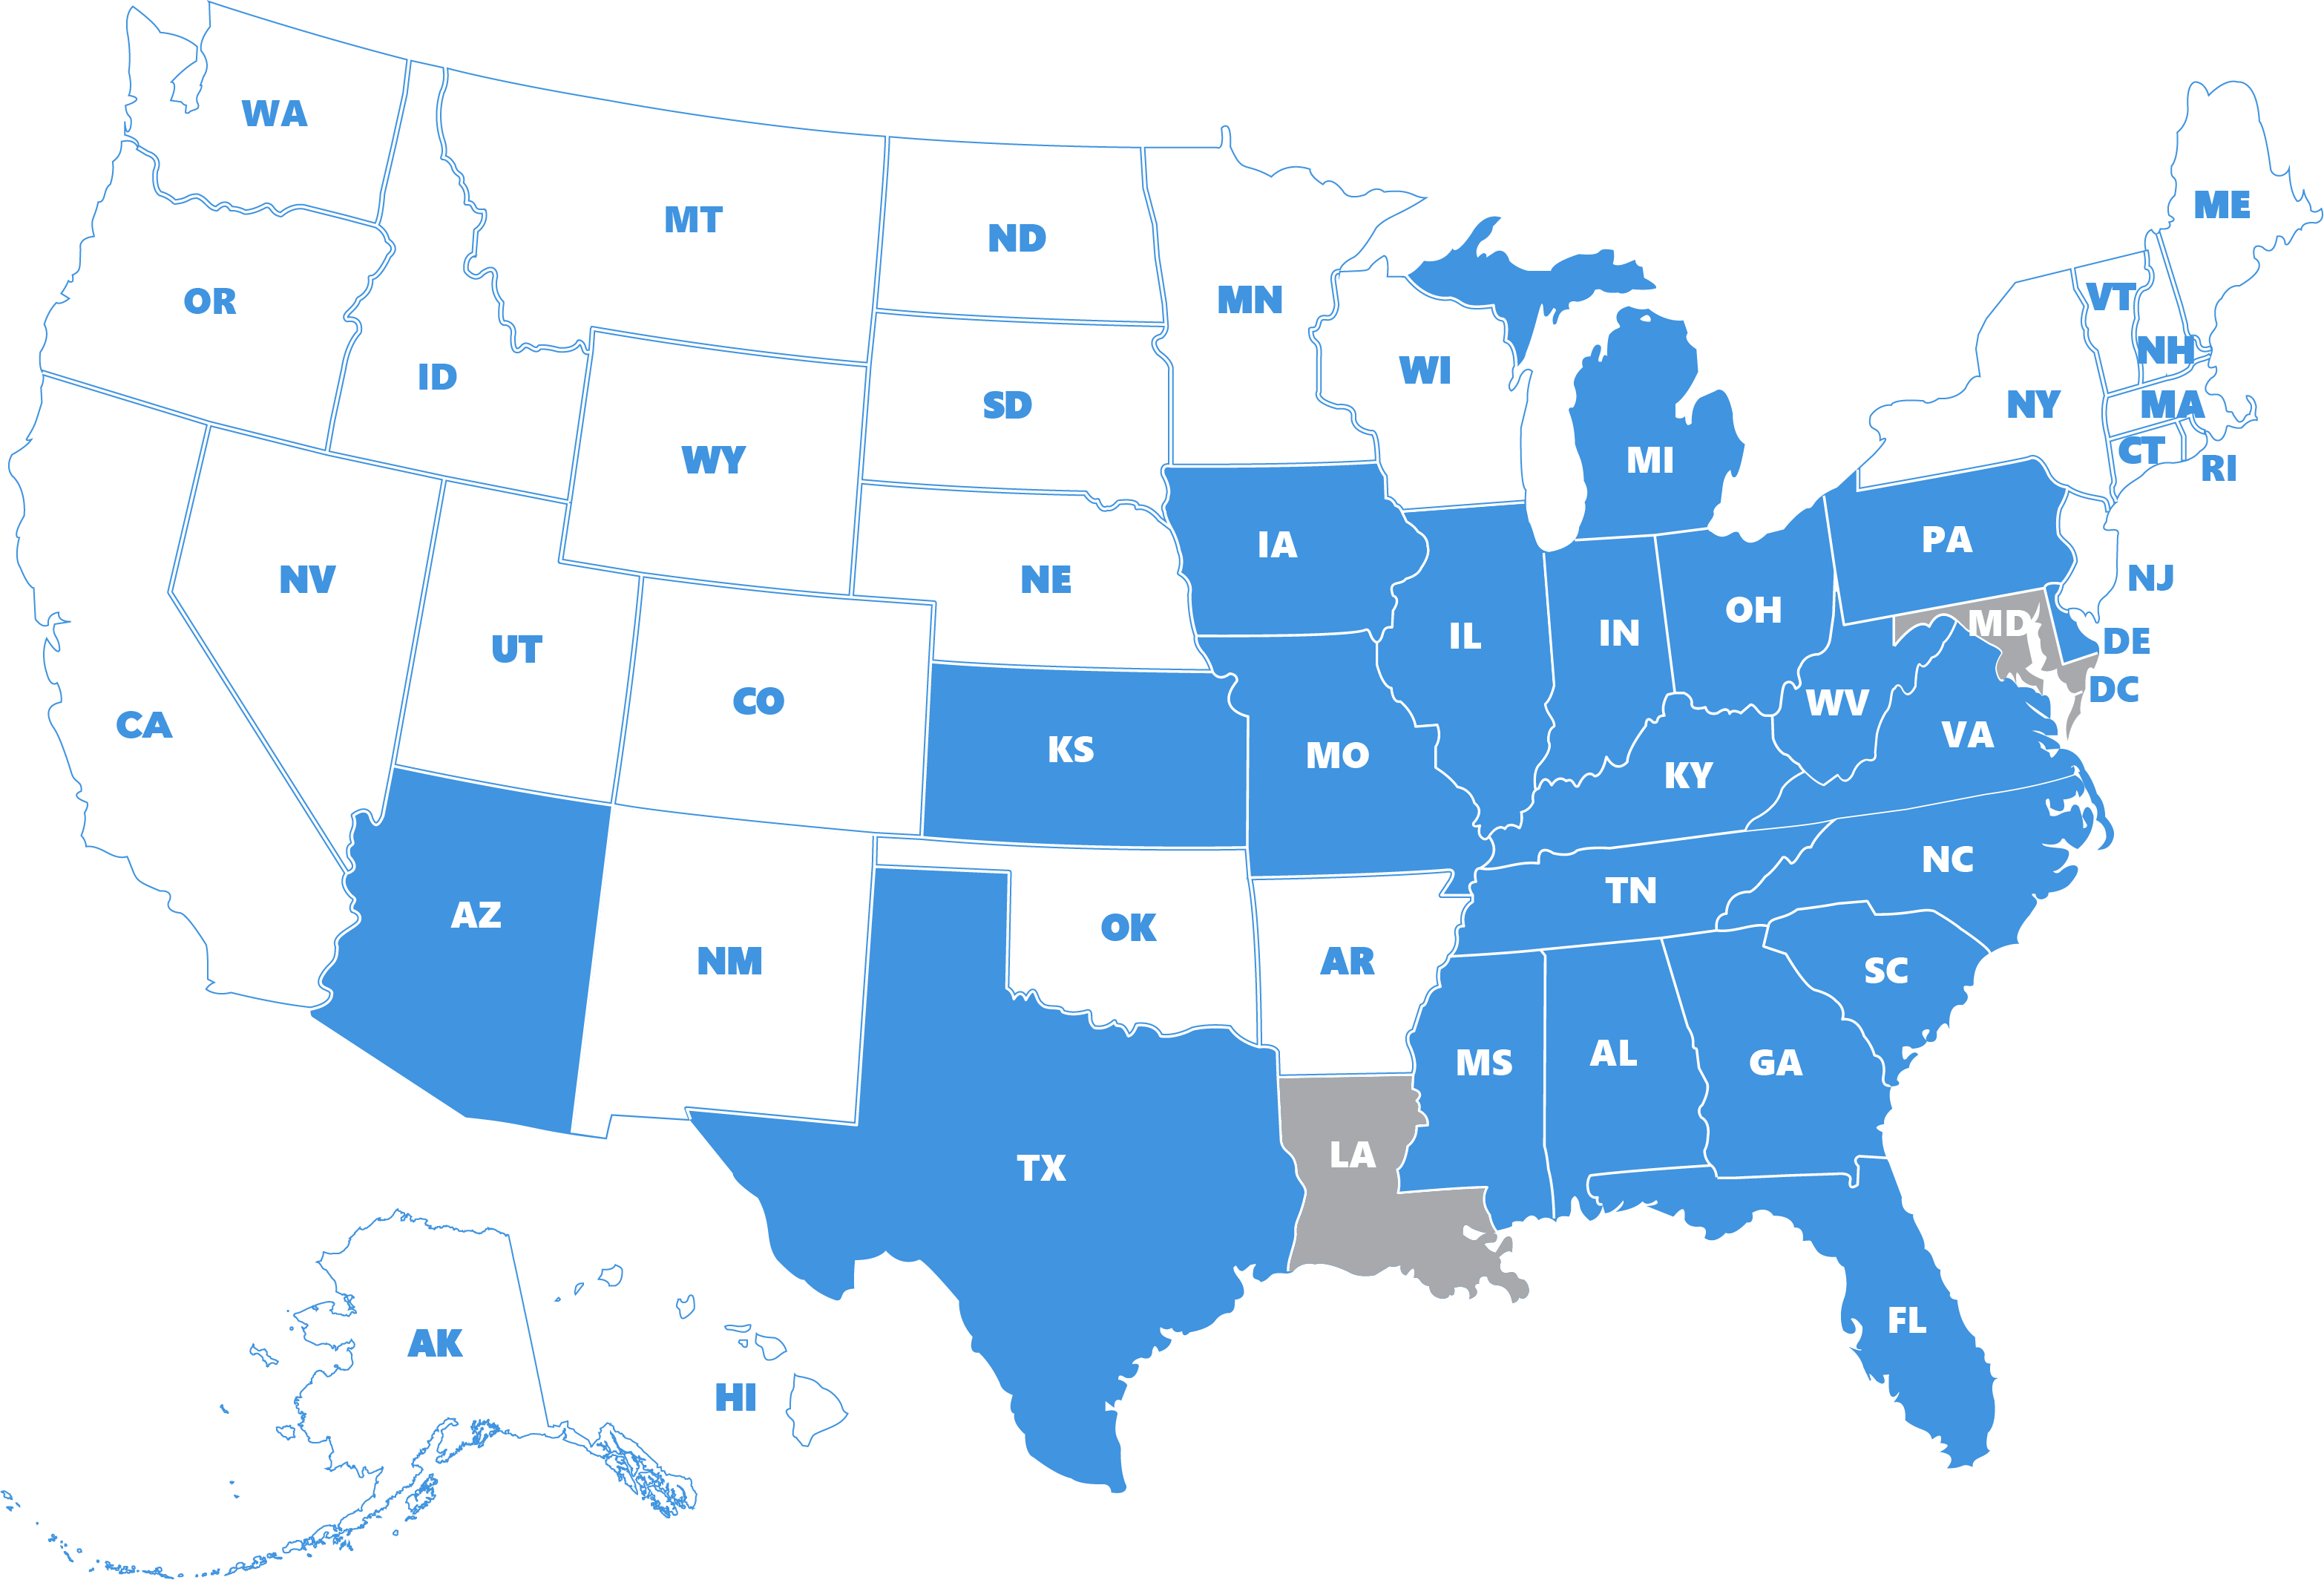 State_Registrations_Updated